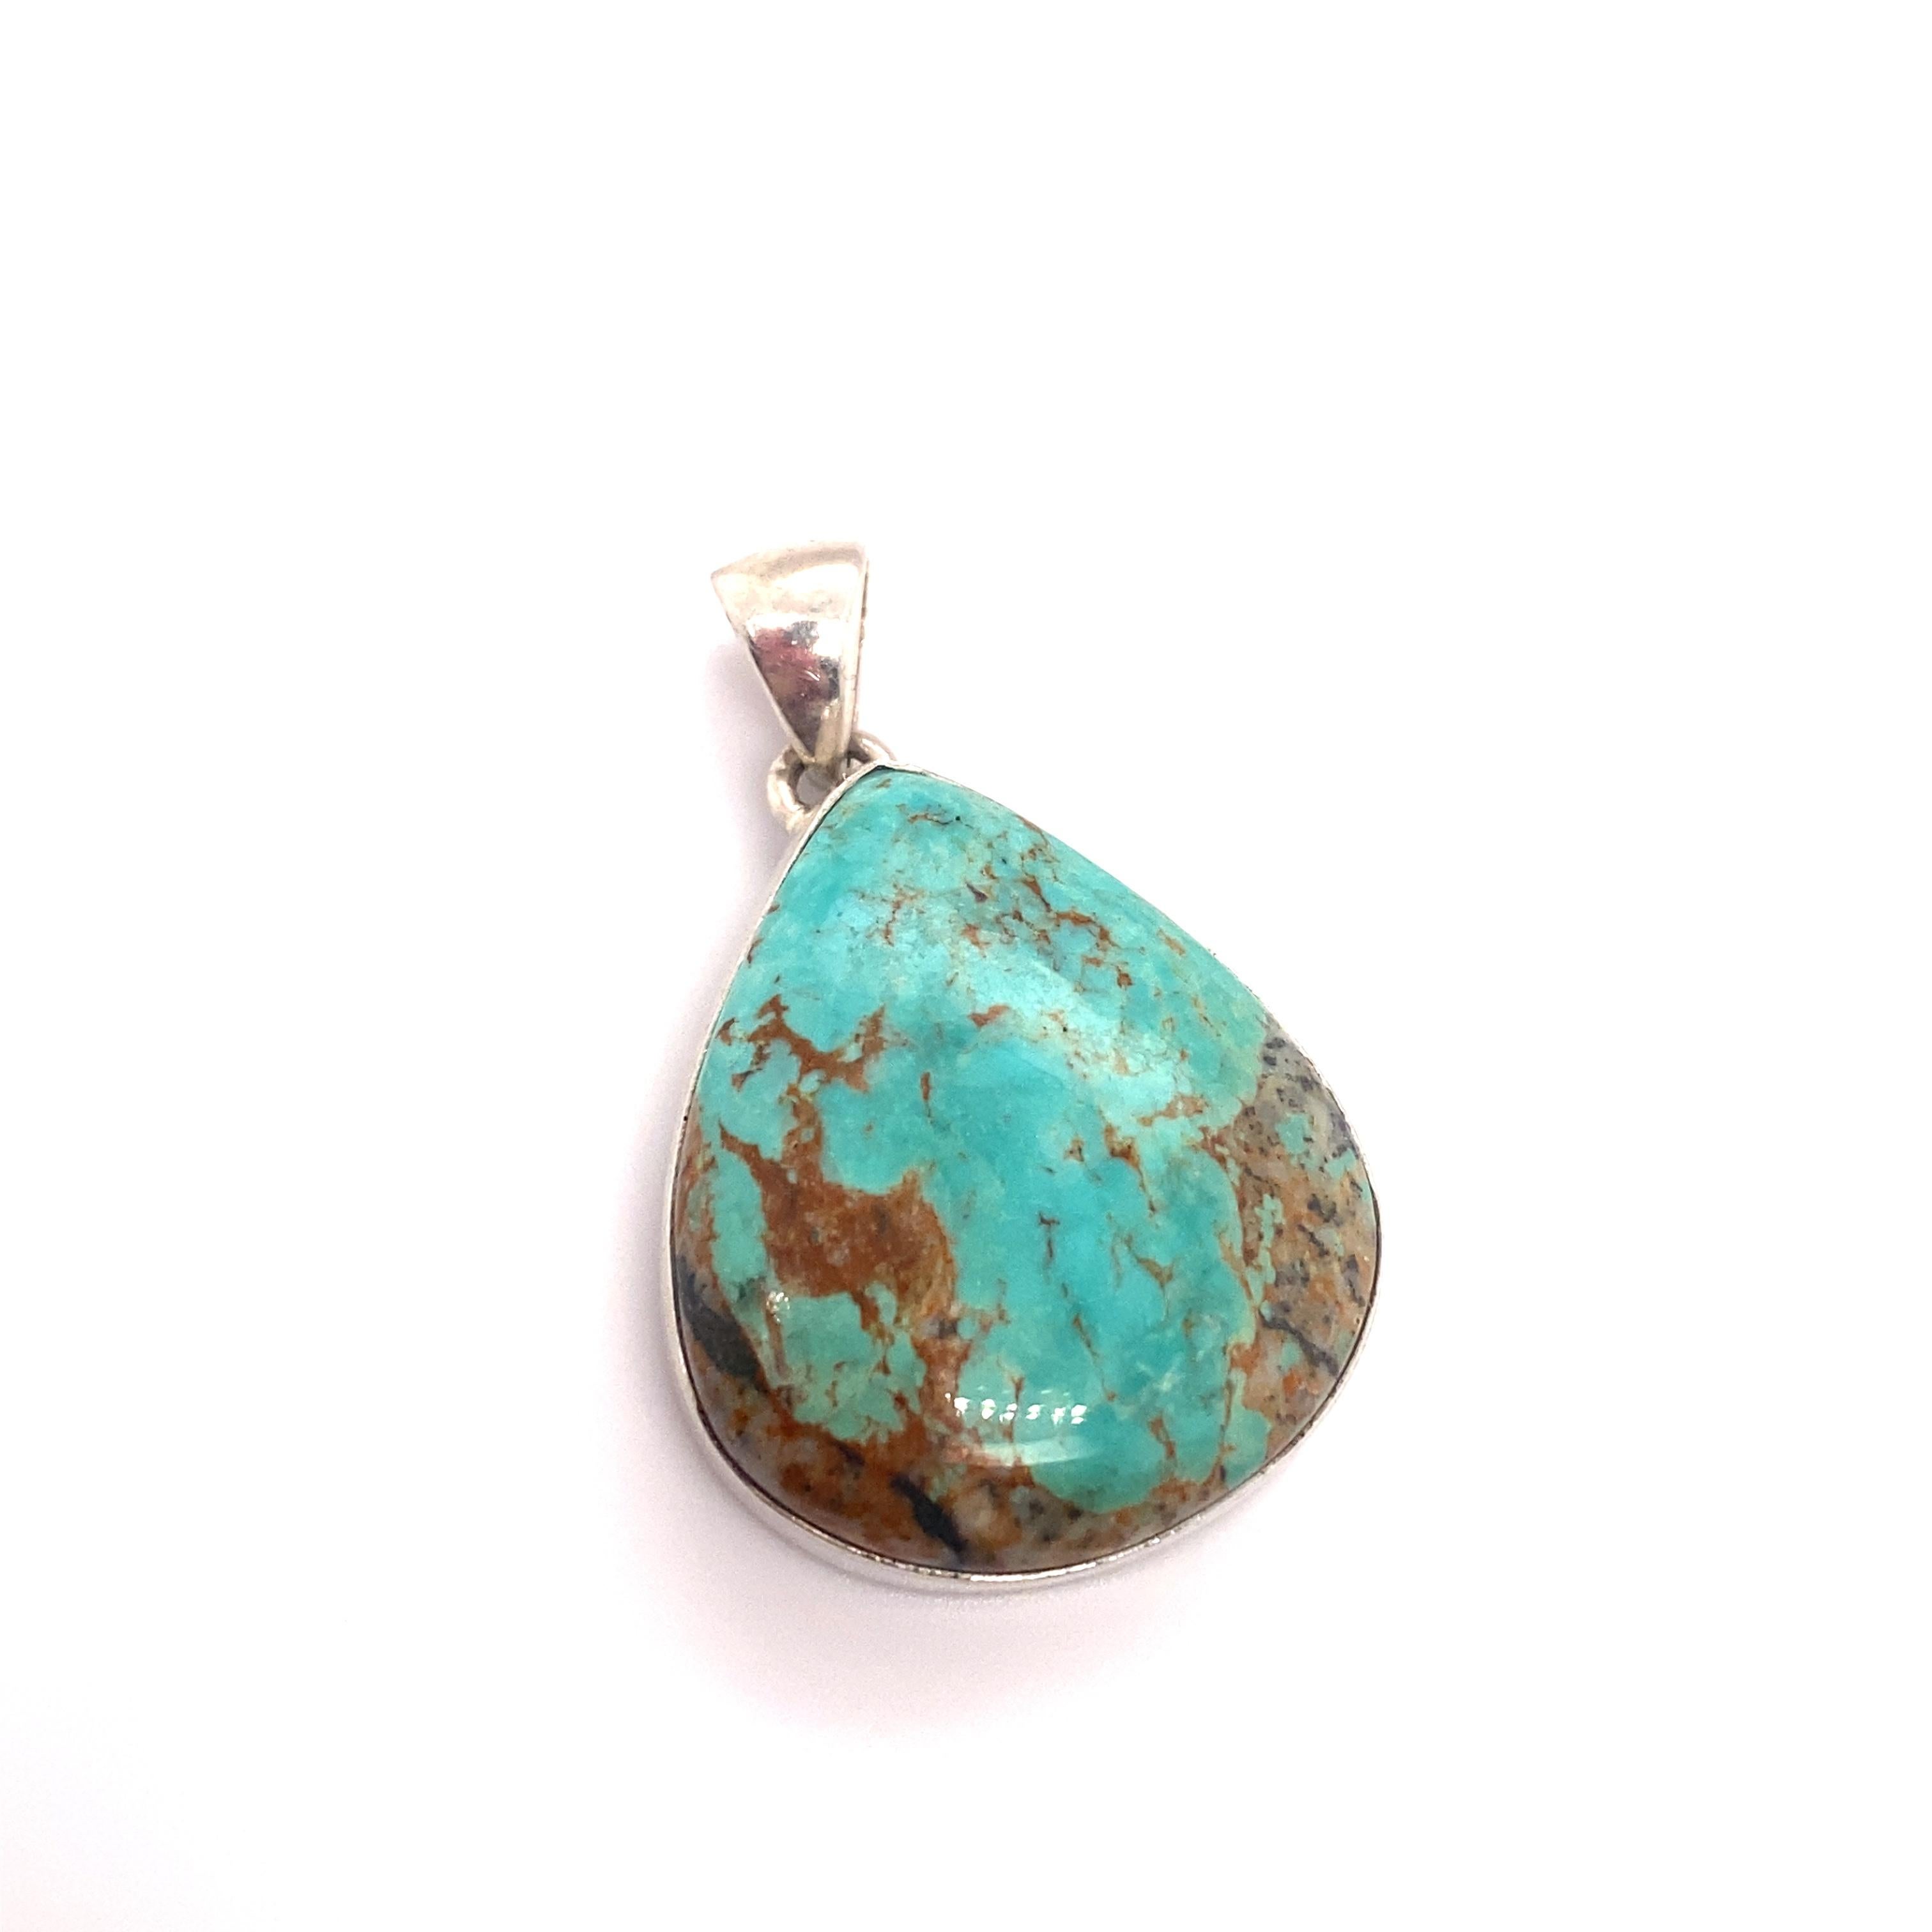 
Item Details: This pendant features a vibrant blue turquoise stone in a sterling silver setting.

Circa: 21st century
Metal Type: Sterling silver
Weight: 8.5g
Size: 1.5